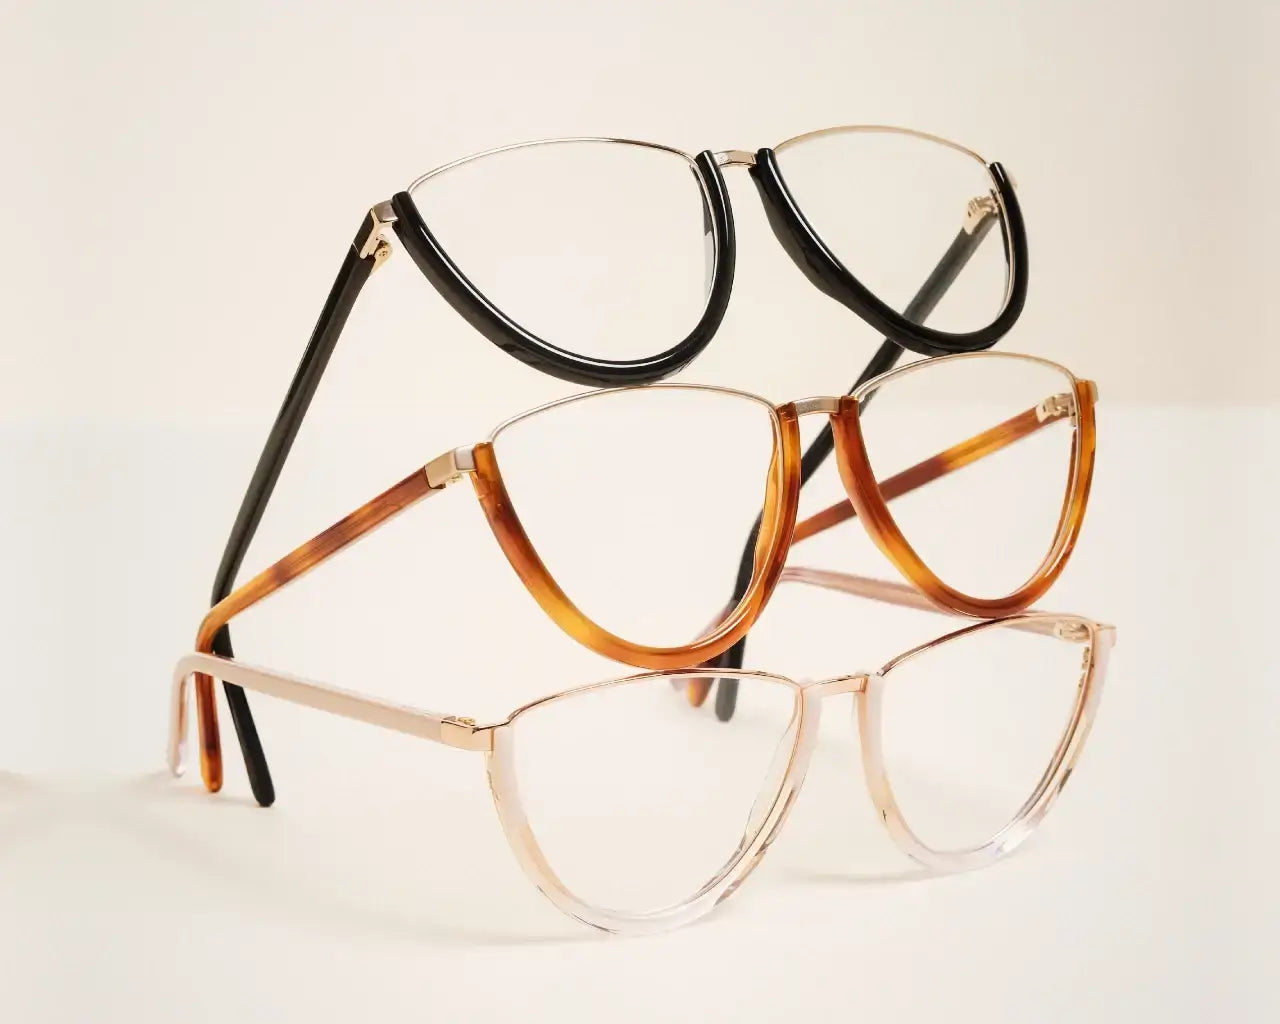 Andy Wolf luxury eyeglasses stacked on top of each other